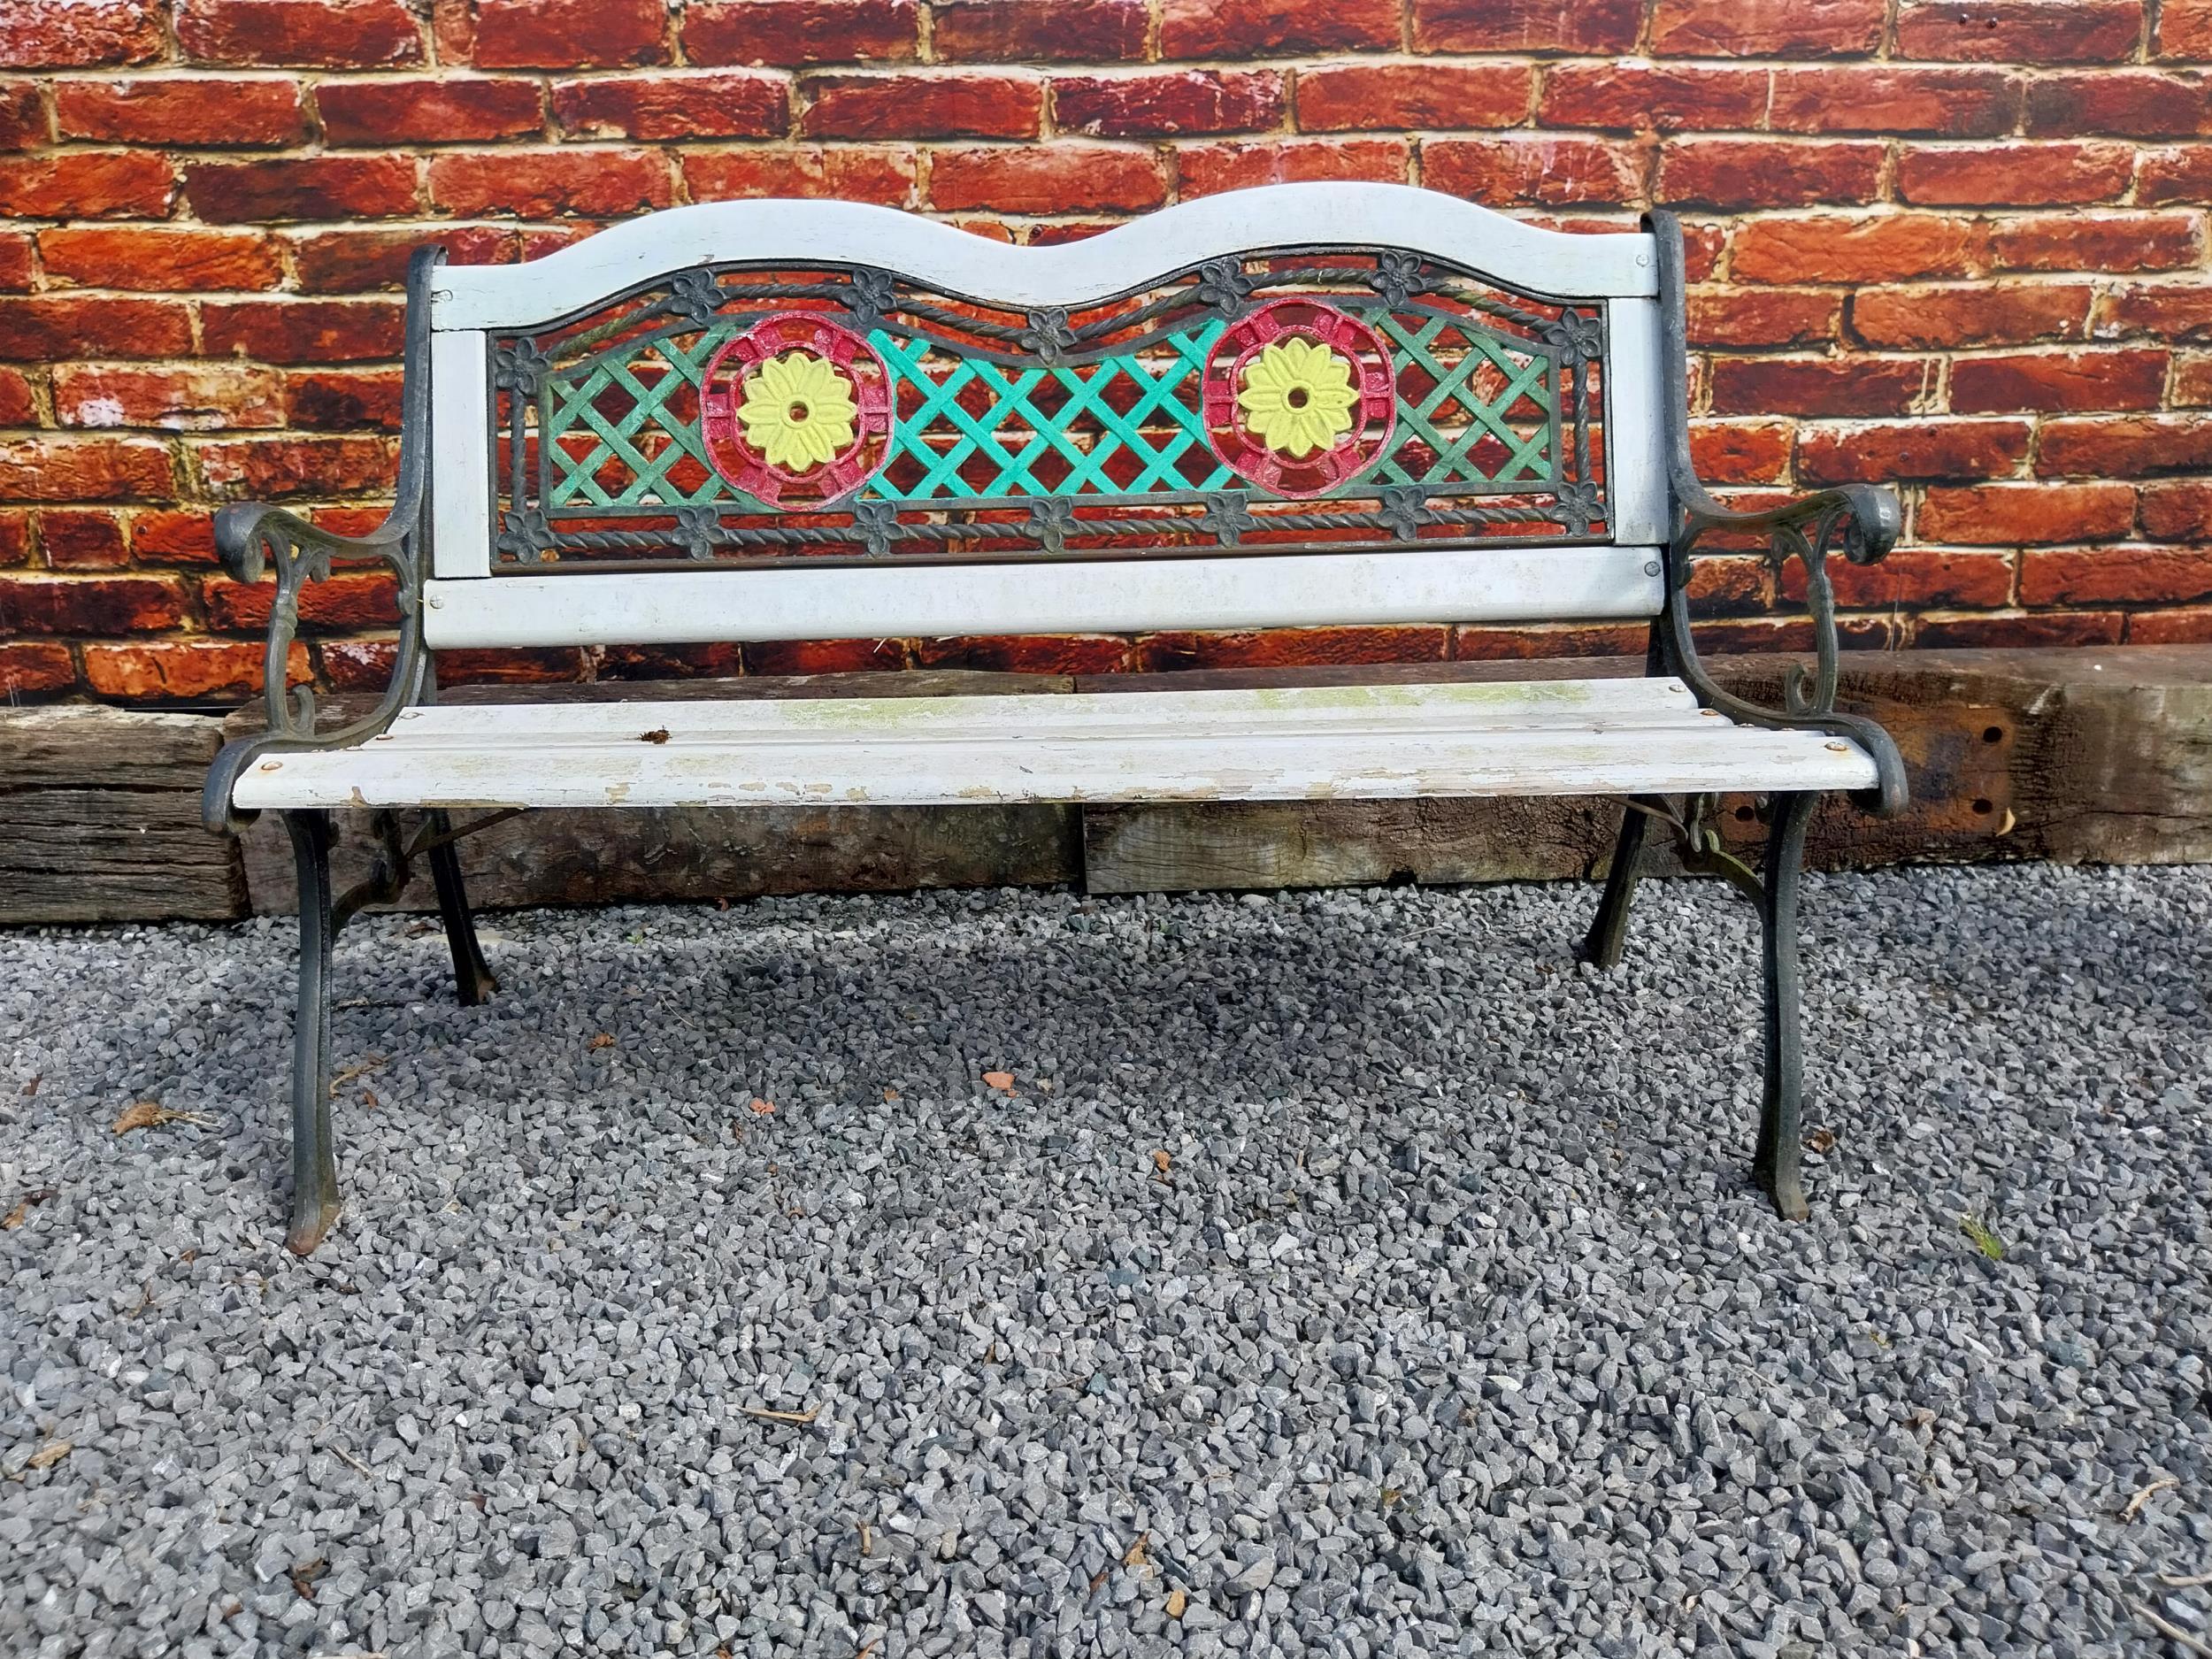 1950s cast iron garden bench with wooden slats decorated with flowers {80 cm H x 128 cm W x 60 cm